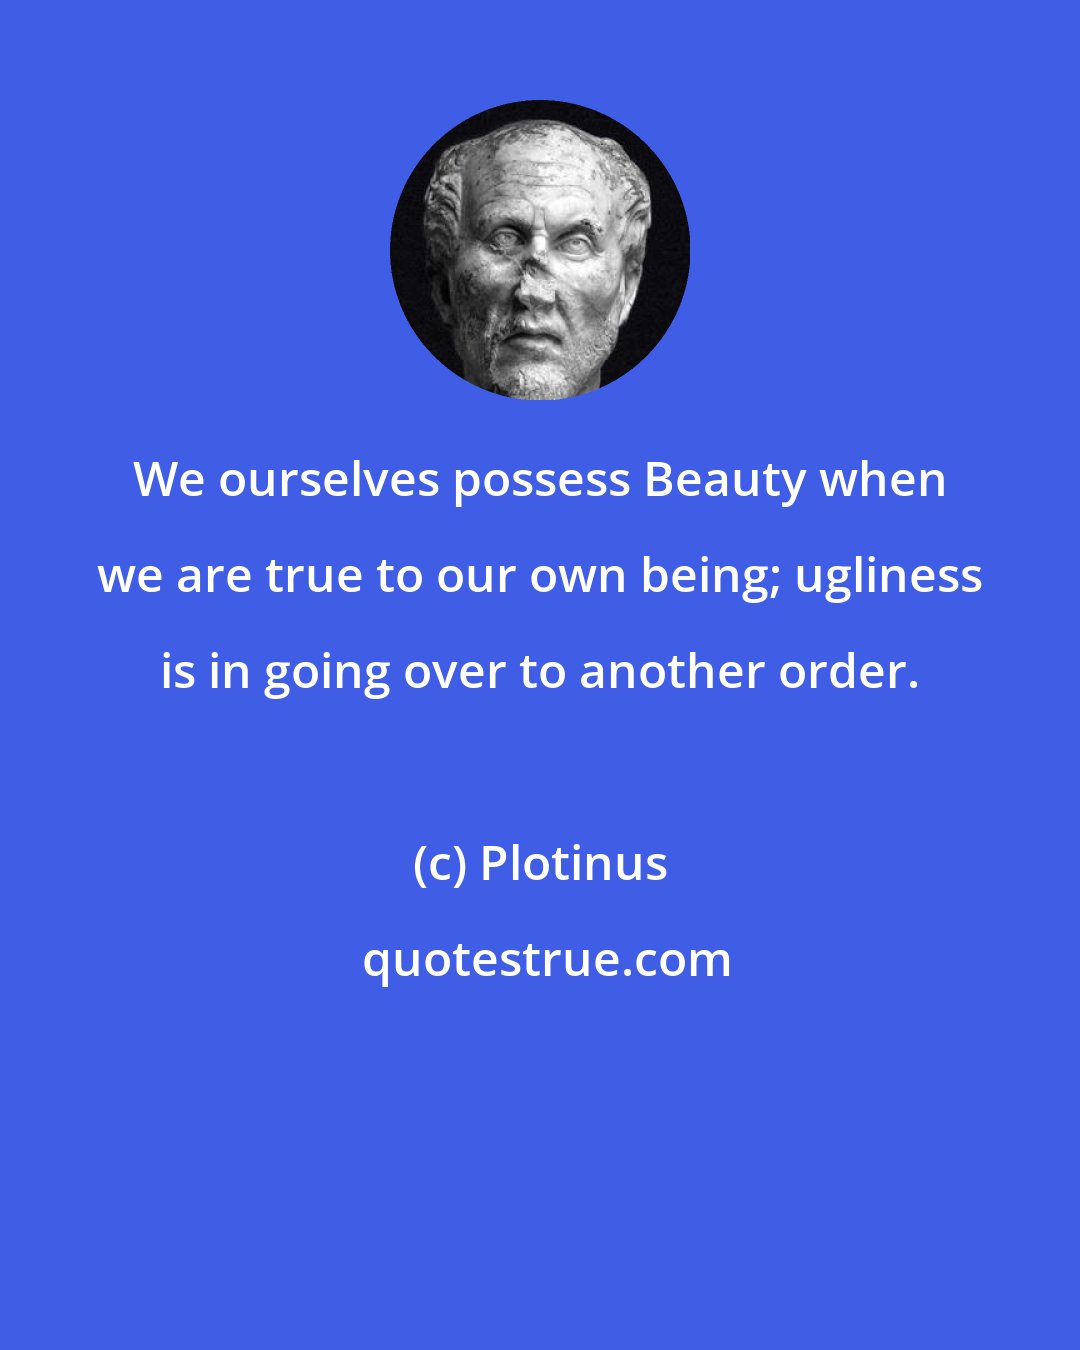 Plotinus: We ourselves possess Beauty when we are true to our own being; ugliness is in going over to another order.